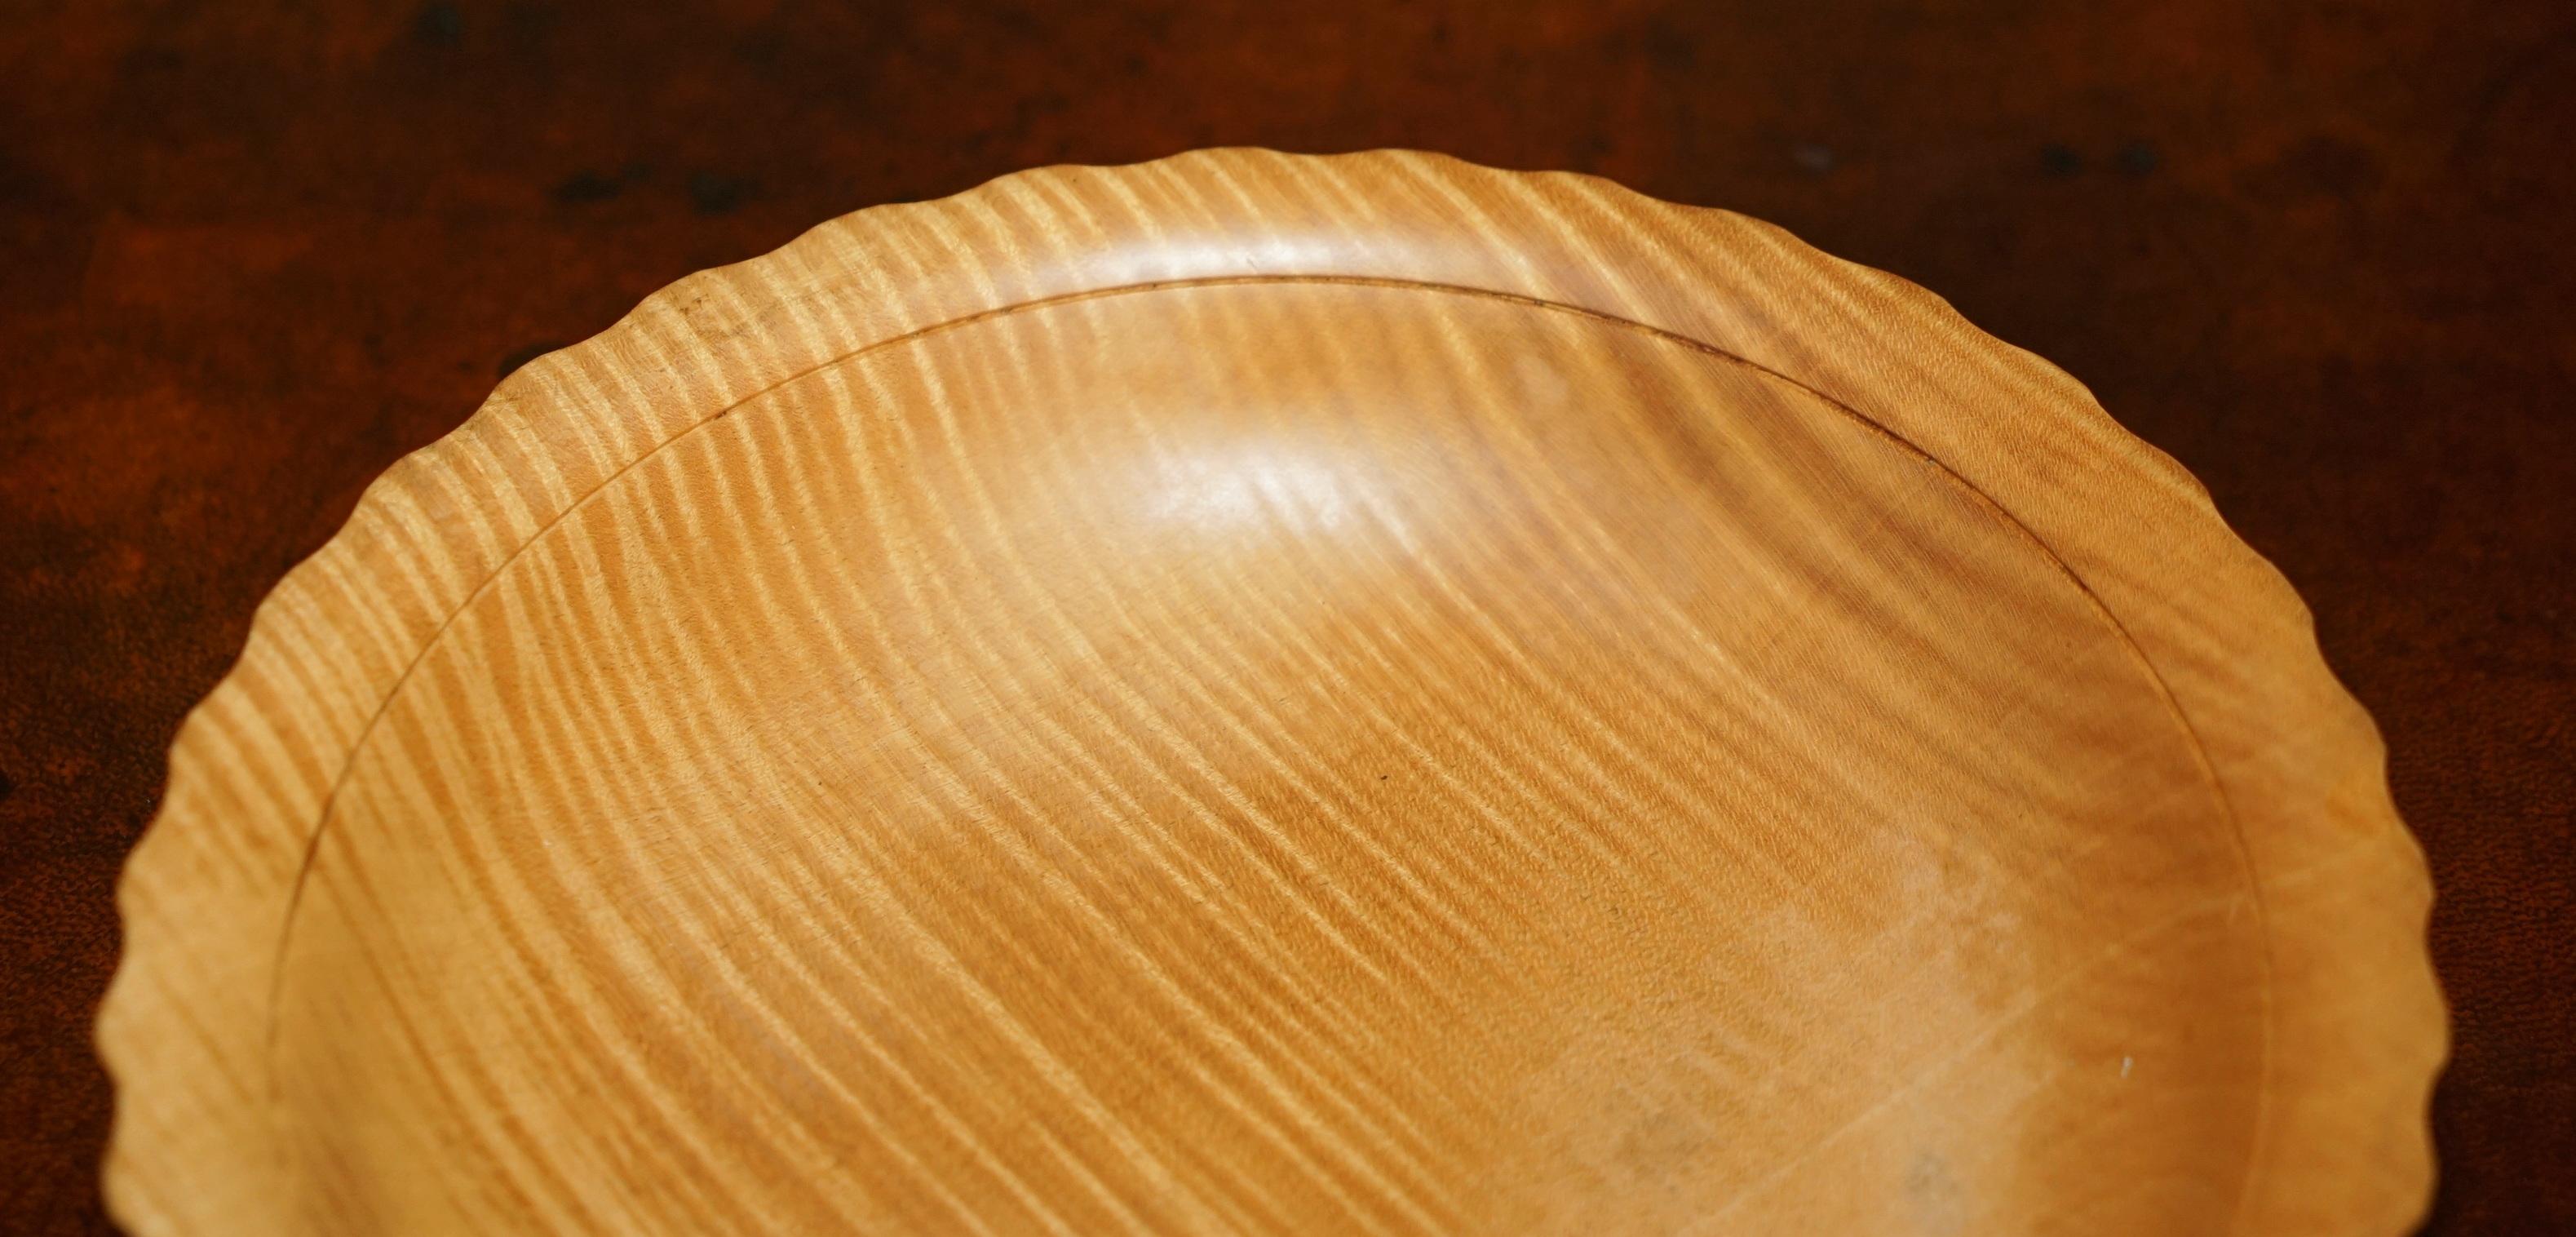 English HAND MADE ViNTAGE RIPPLE SYCAMORE FRUIT BOWL SIGNED TO THE BASE BOB FRENCH For Sale